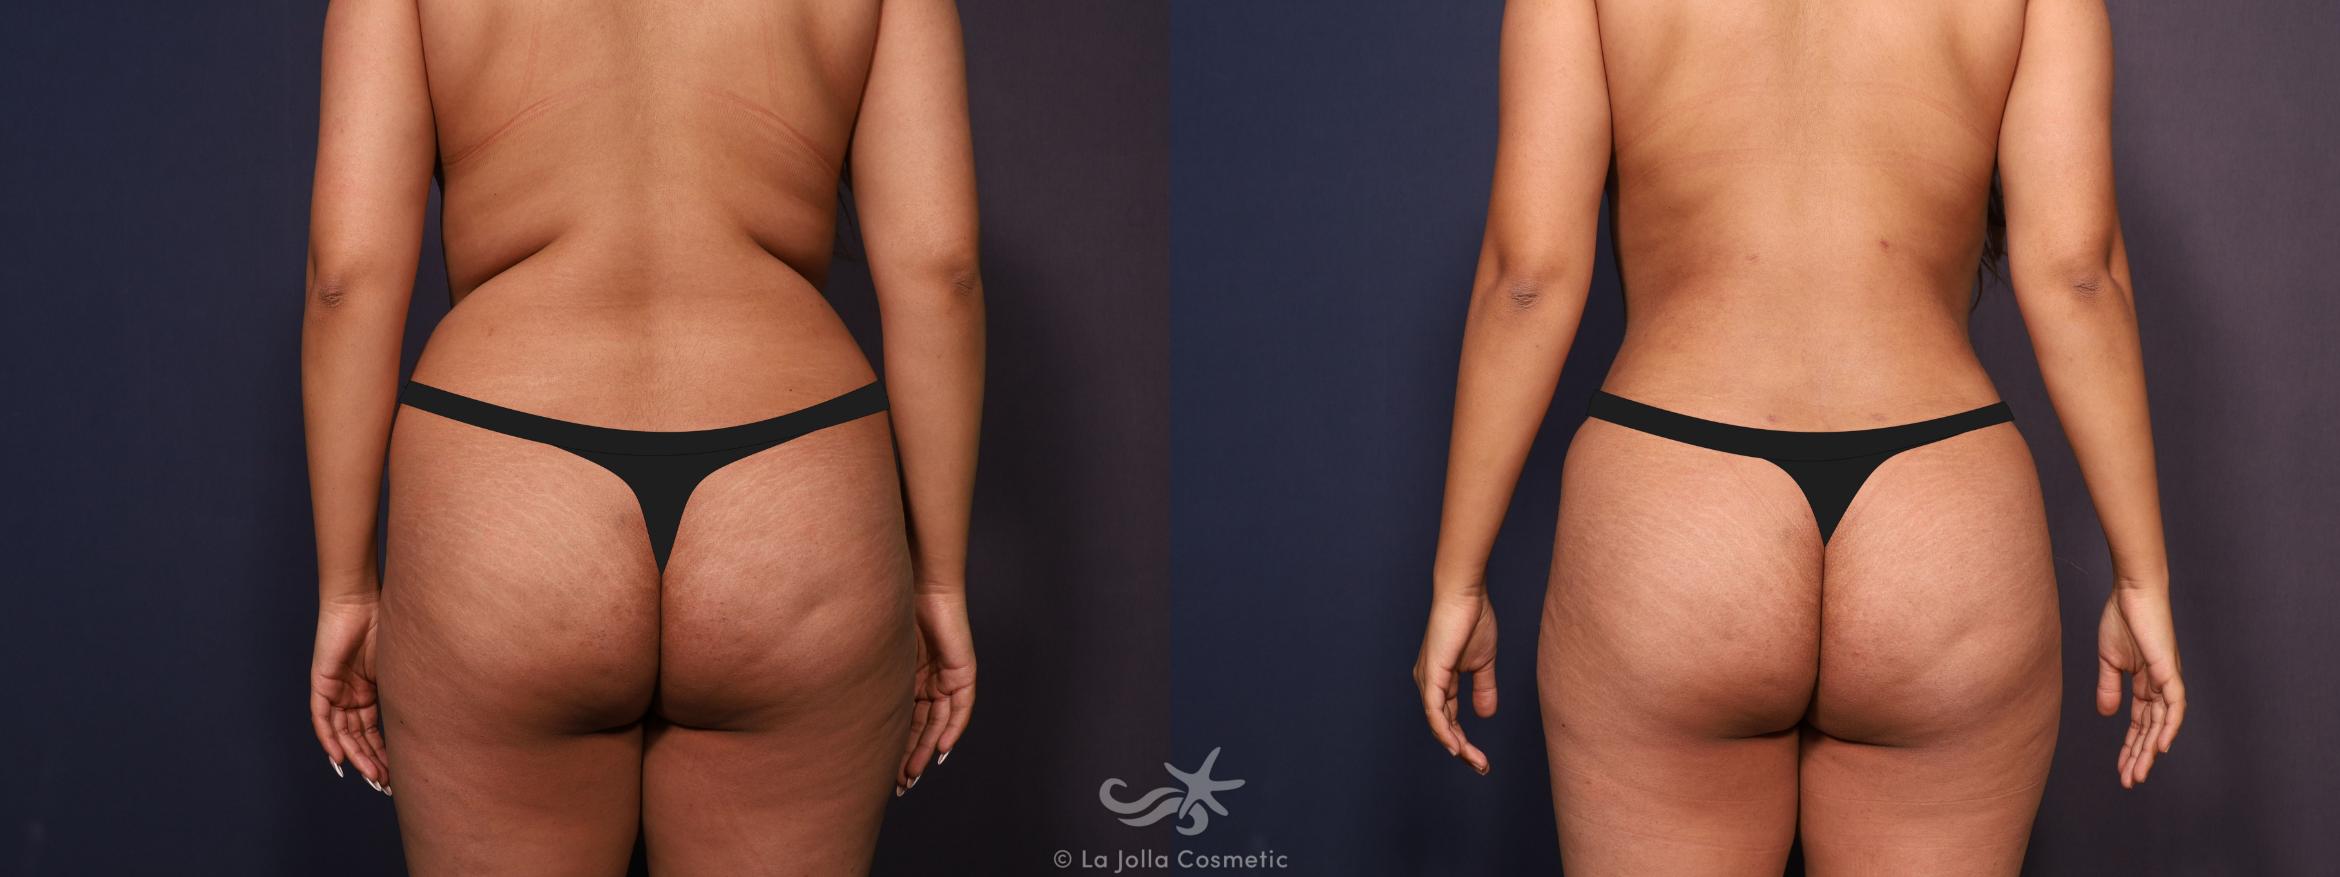 Before & After Liposuction Result 702 Back View in San Diego, CA